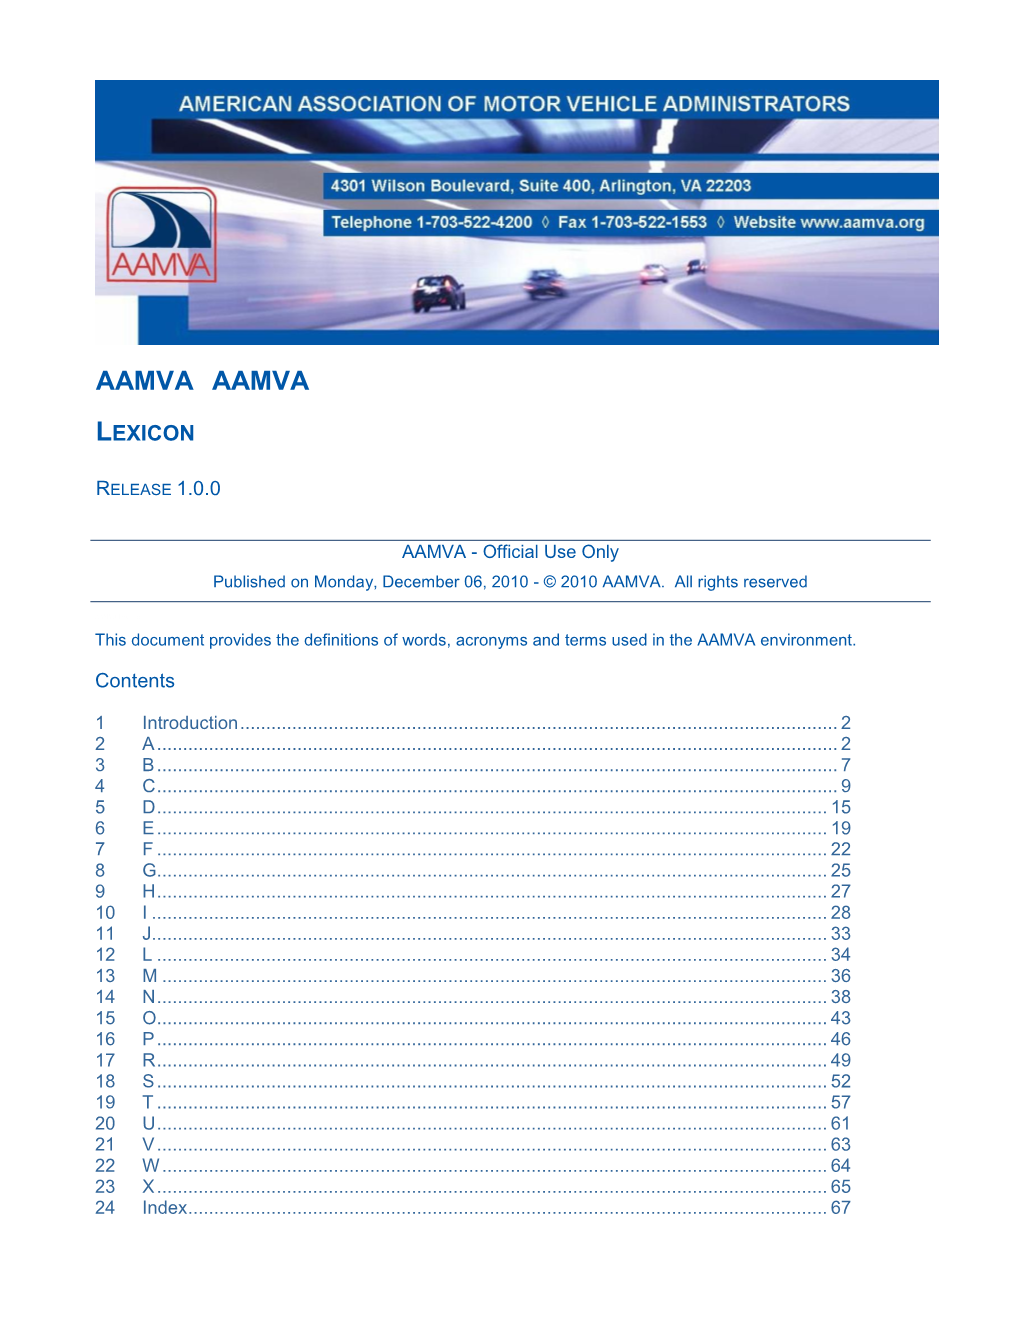 AAMVA Lexicon This Document Provides the Definitions of Words, Acronyms and Terms Used in the AAMVA Environment